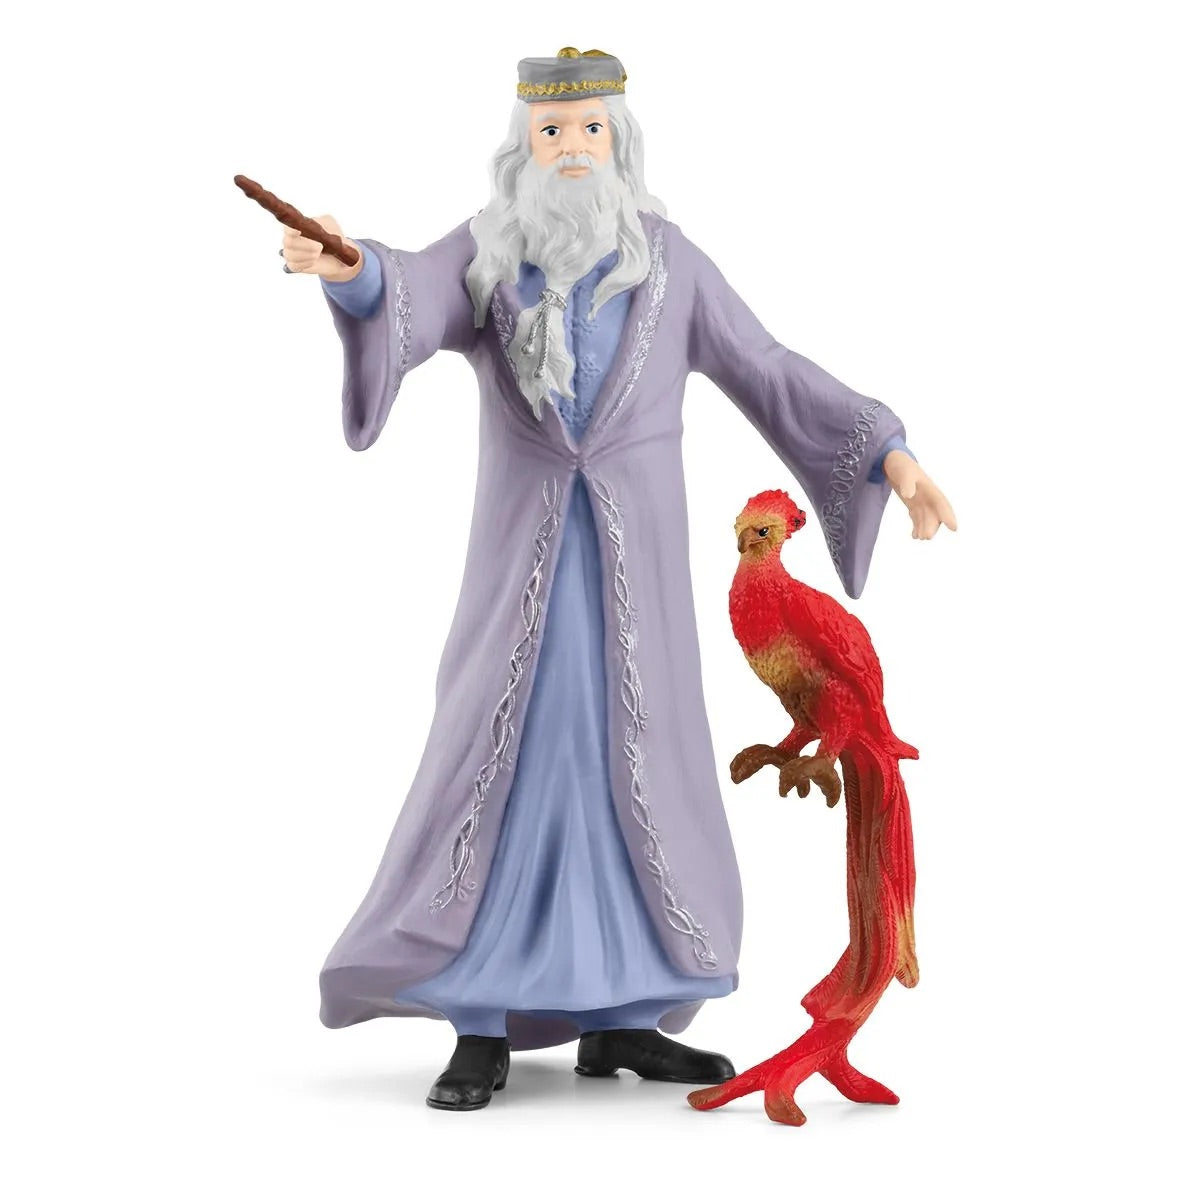 Harry Potter Dumbledore & Fawkes Figurine by Schleich #42637